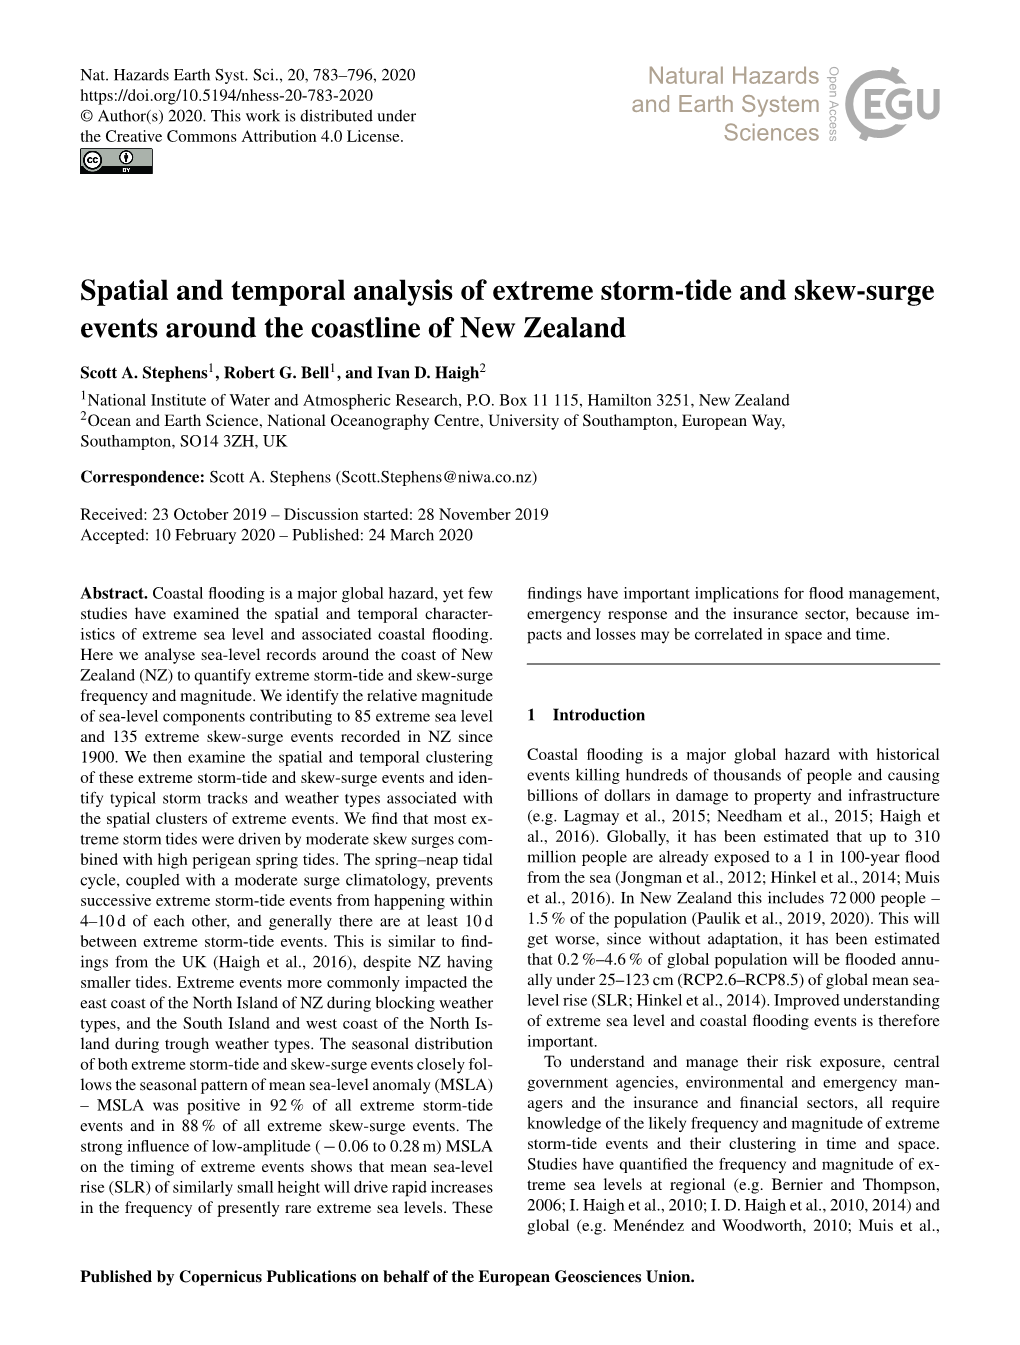 Spatial and Temporal Analysis of Extreme Storm-Tide and Skew-Surge Events Around the Coastline of New Zealand